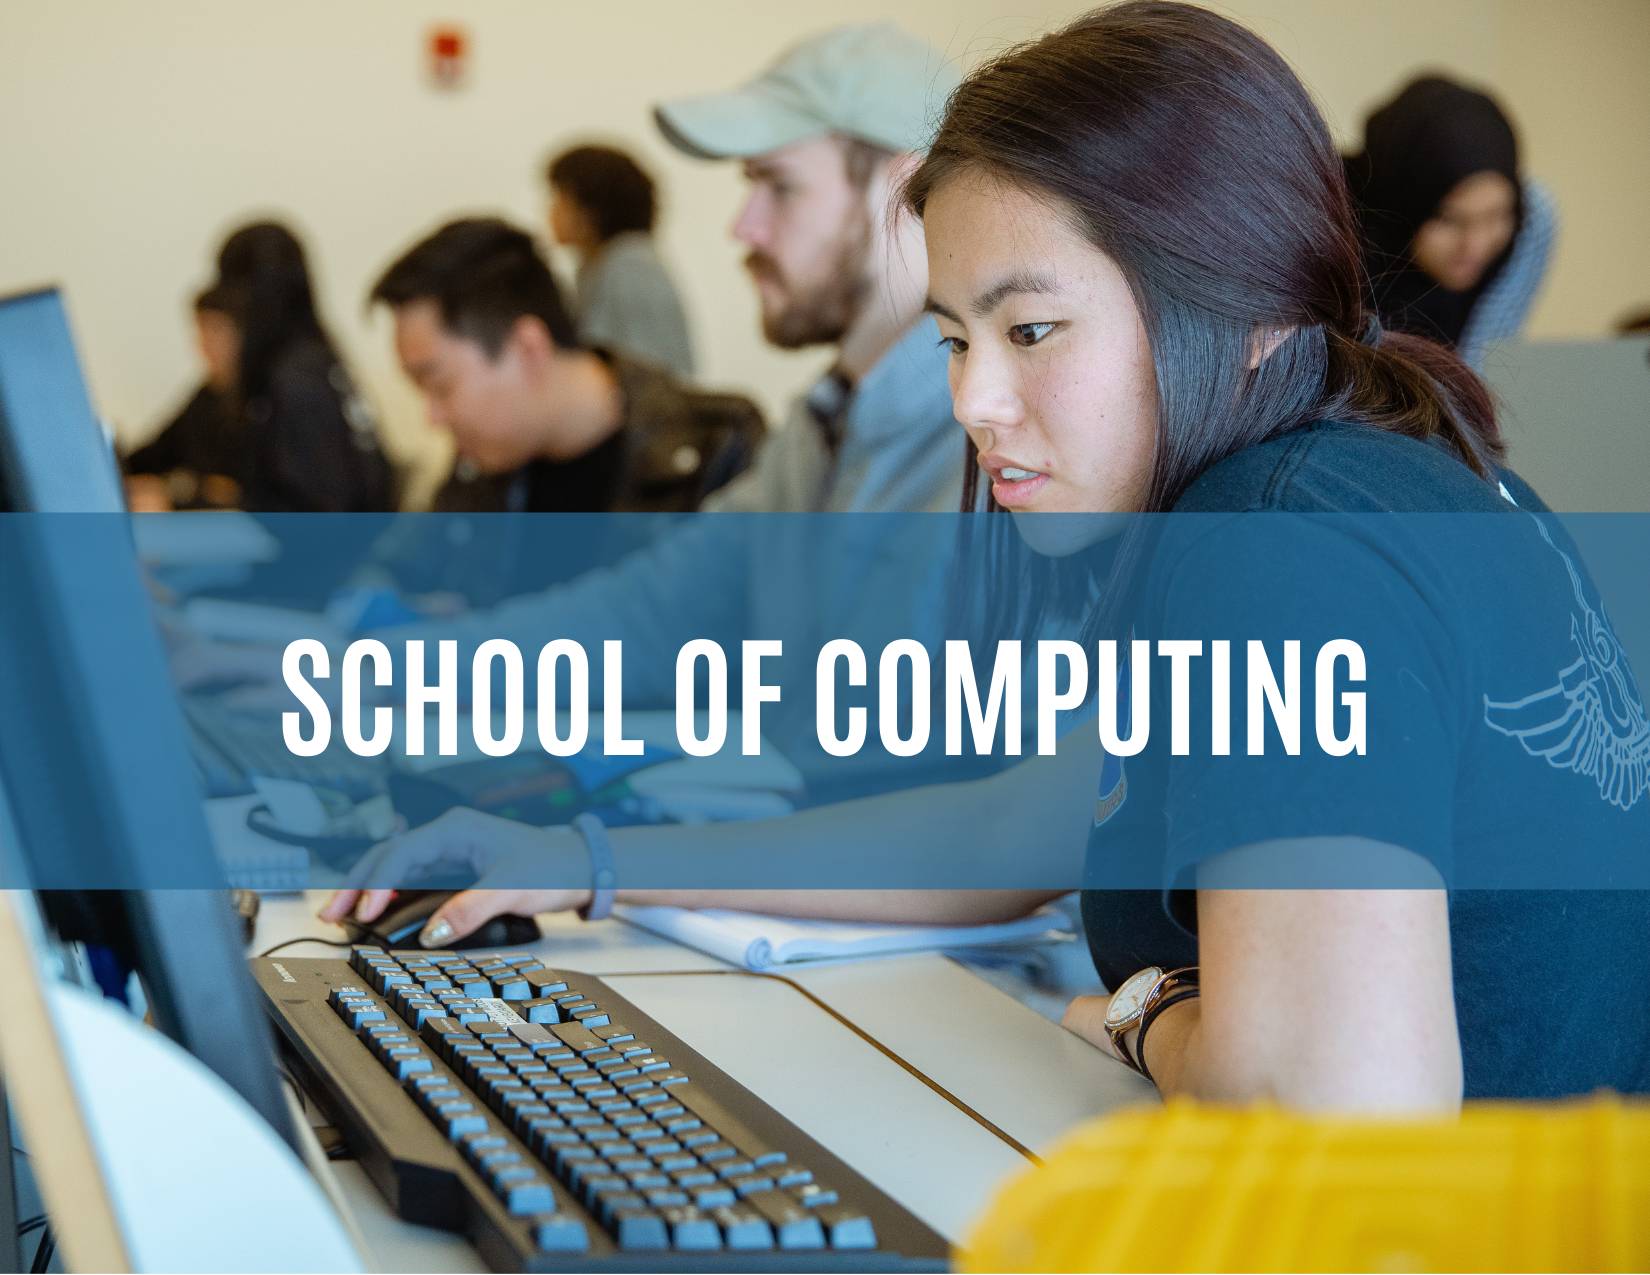 Link to Program plans for School of Computing - Computing student reviewing code